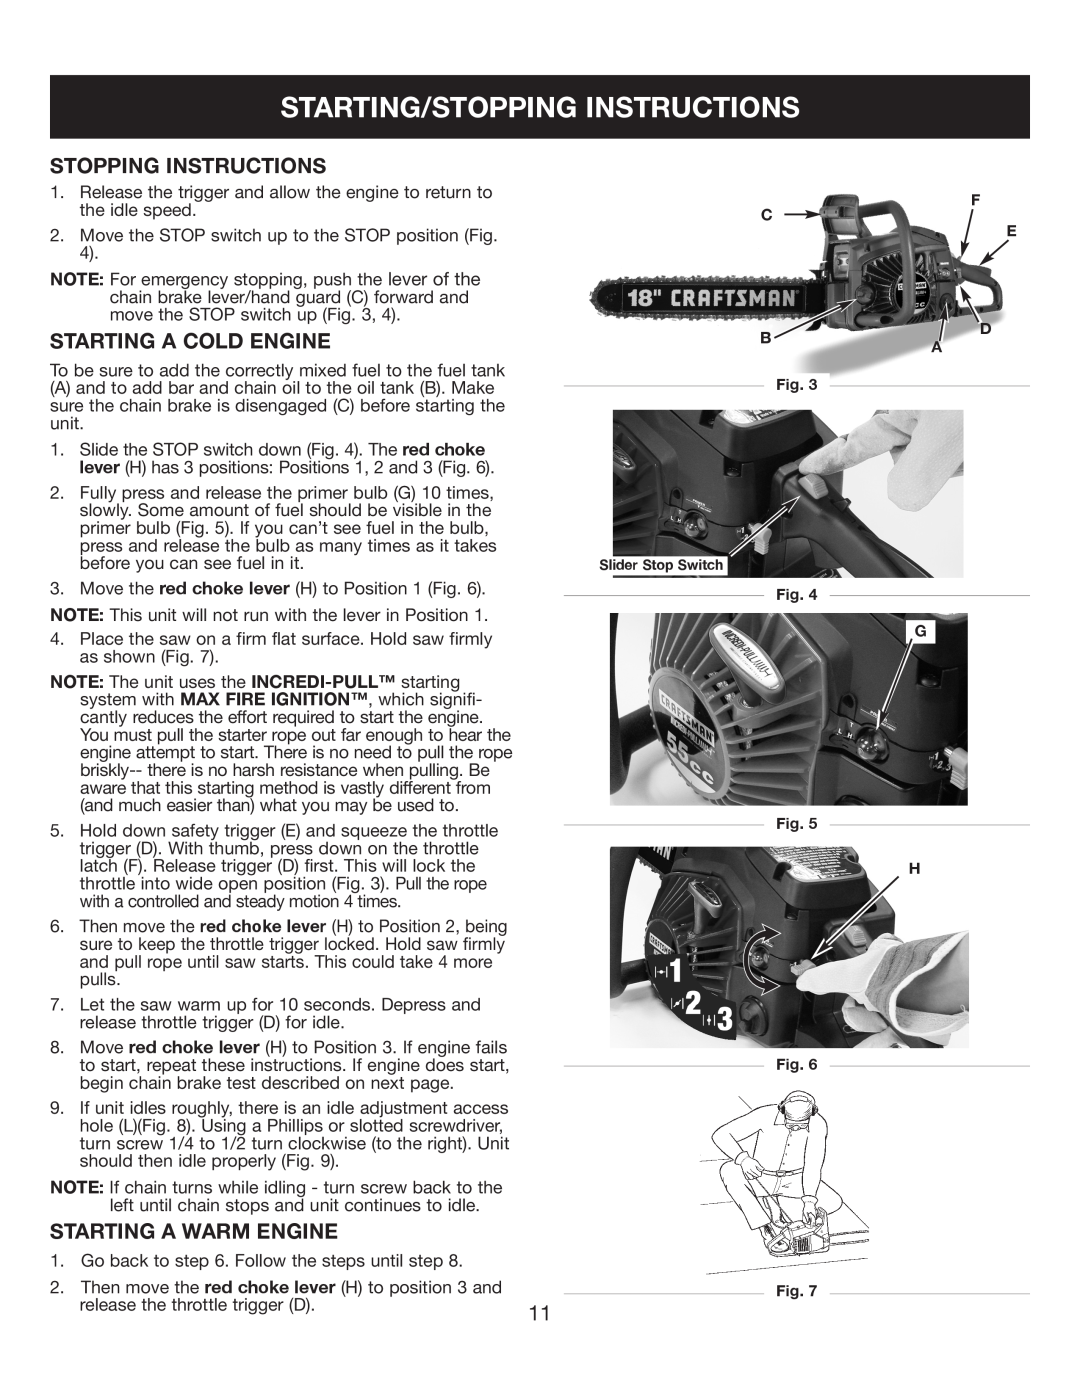 Sears 316.35084 manual Starting/Stopping Instructions, Starting A Cold Engine, Starting A Warm Engine 